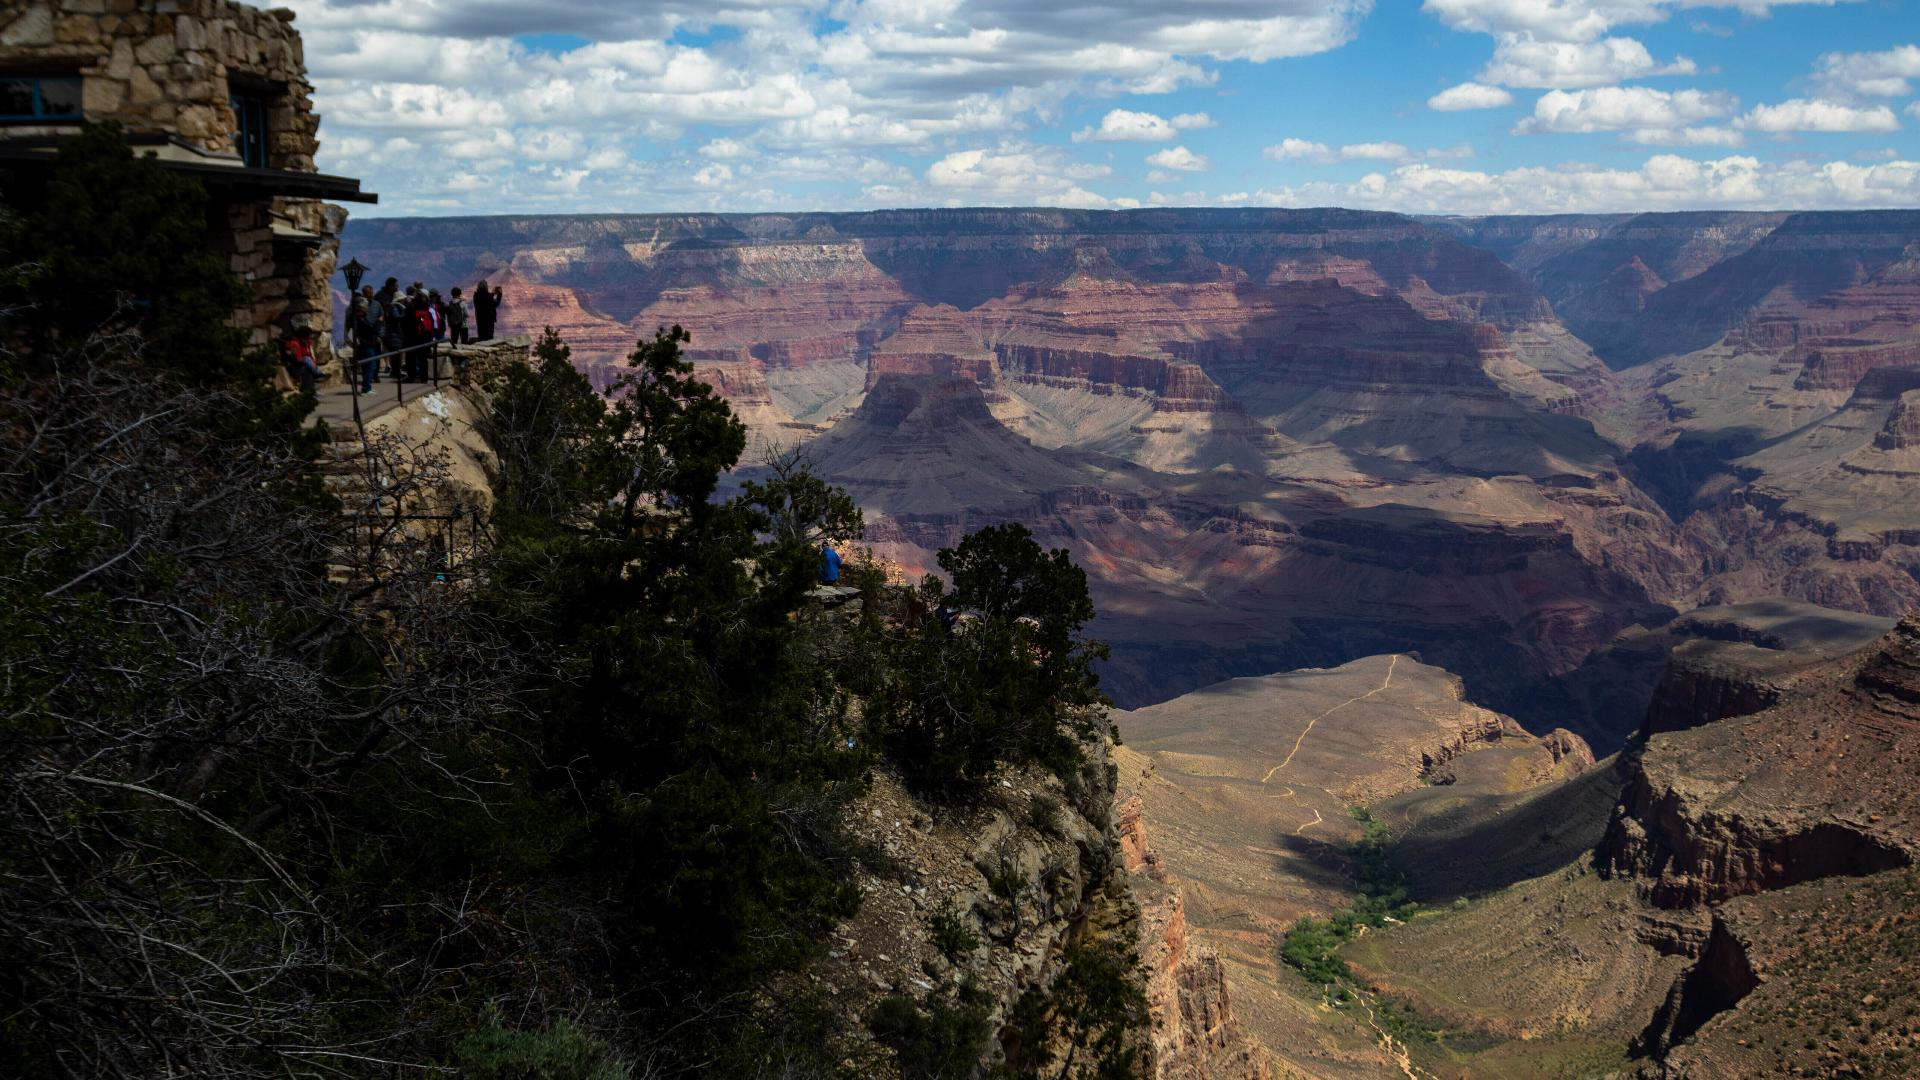 The National Parks Service is investigating the death of an Austin man who was hiking in the Grand Canyon.